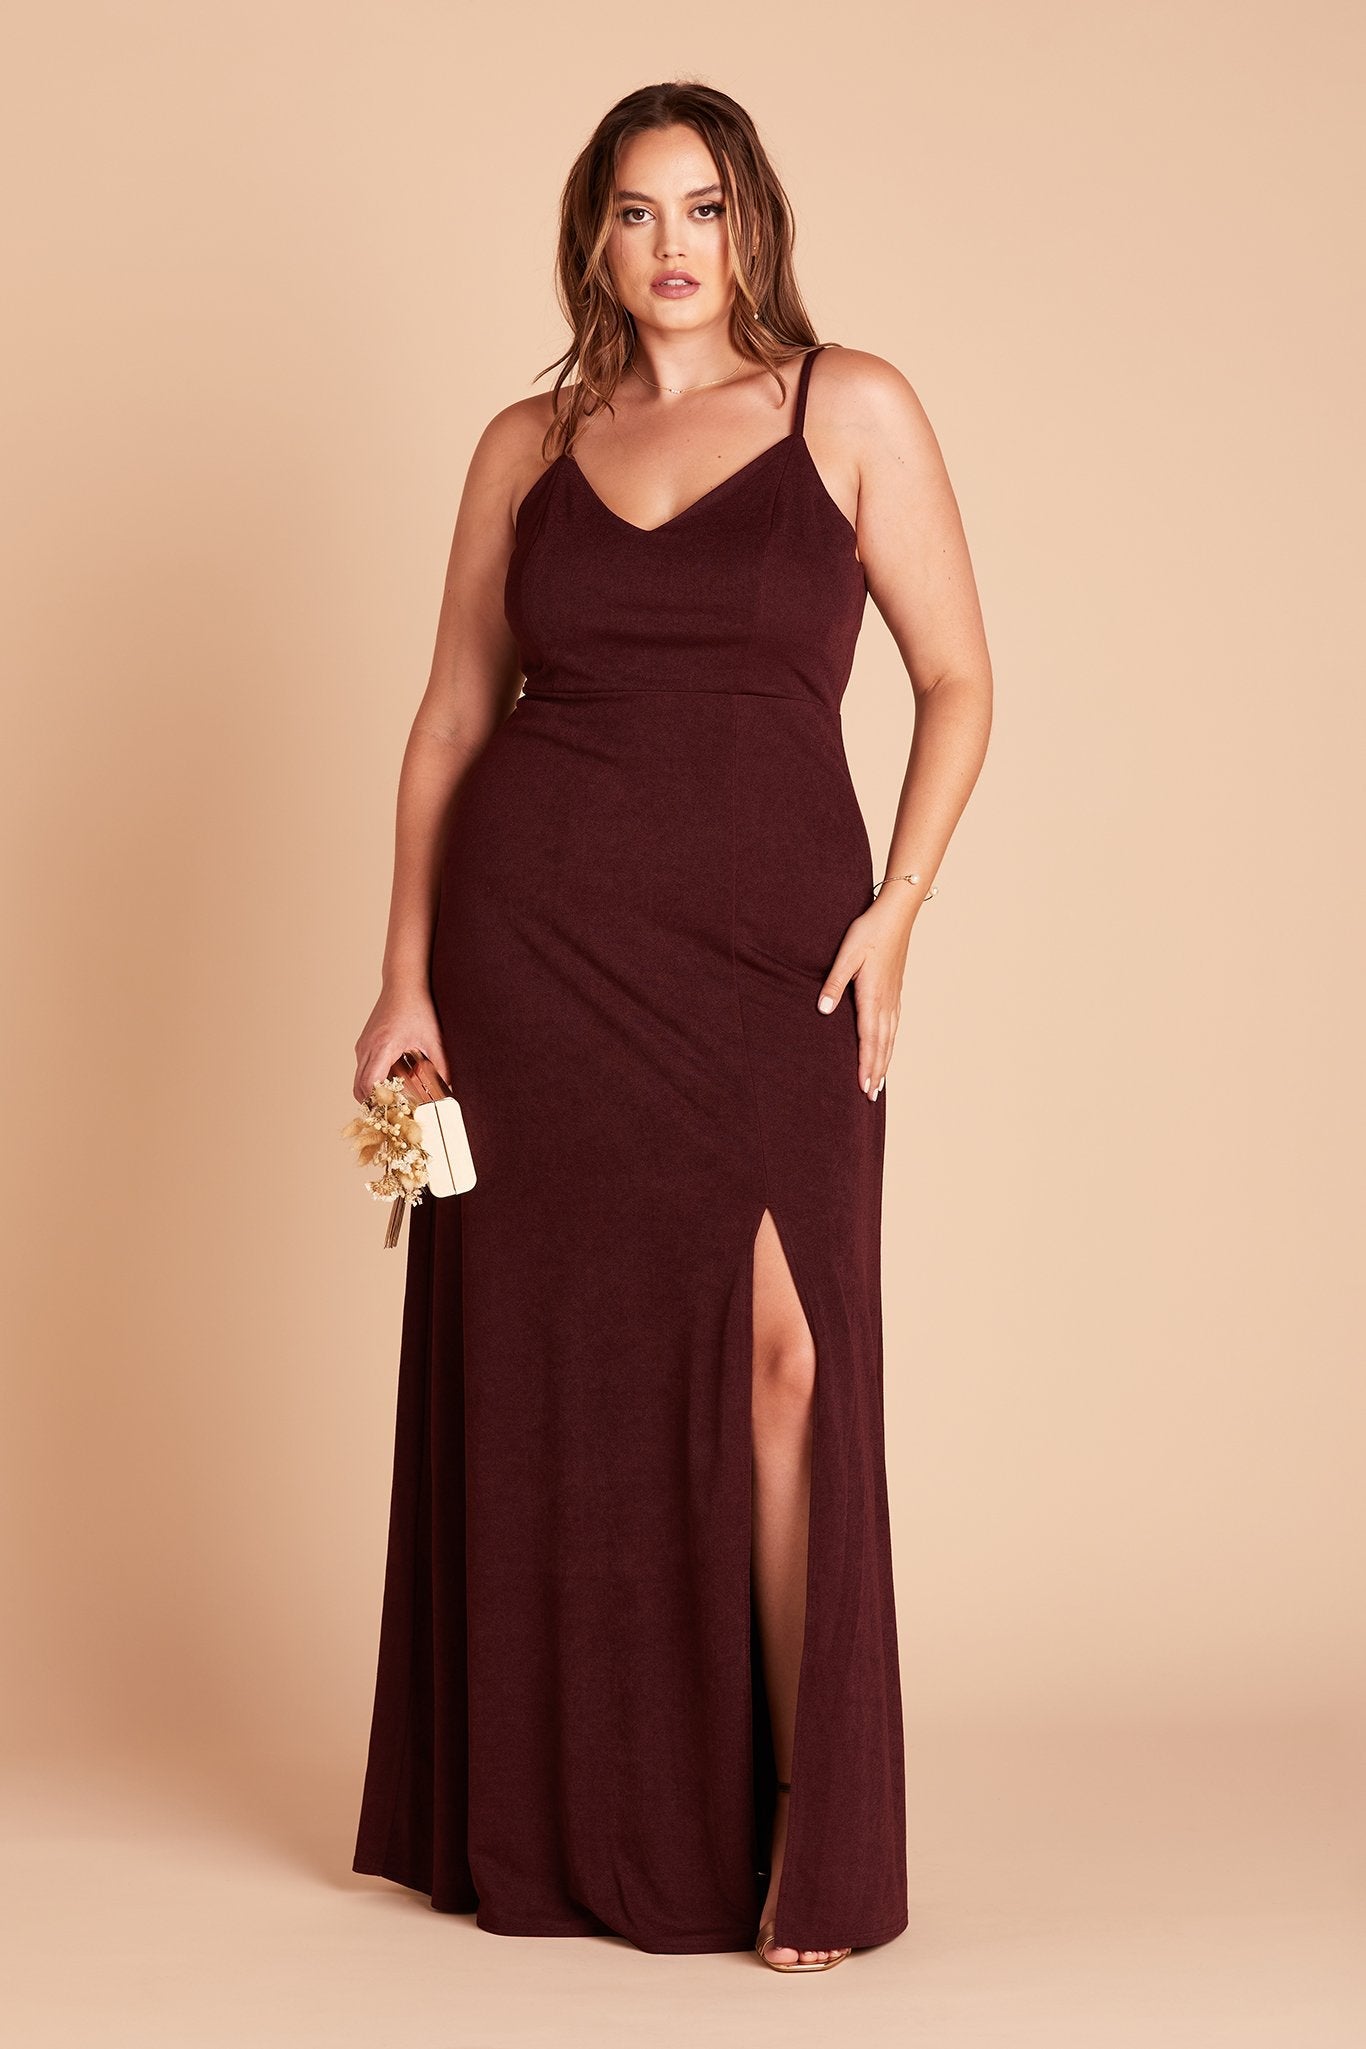 Jay plus size bridesmaid dress with slit in cabernet burgundy crepe by Birdy Grey, front view